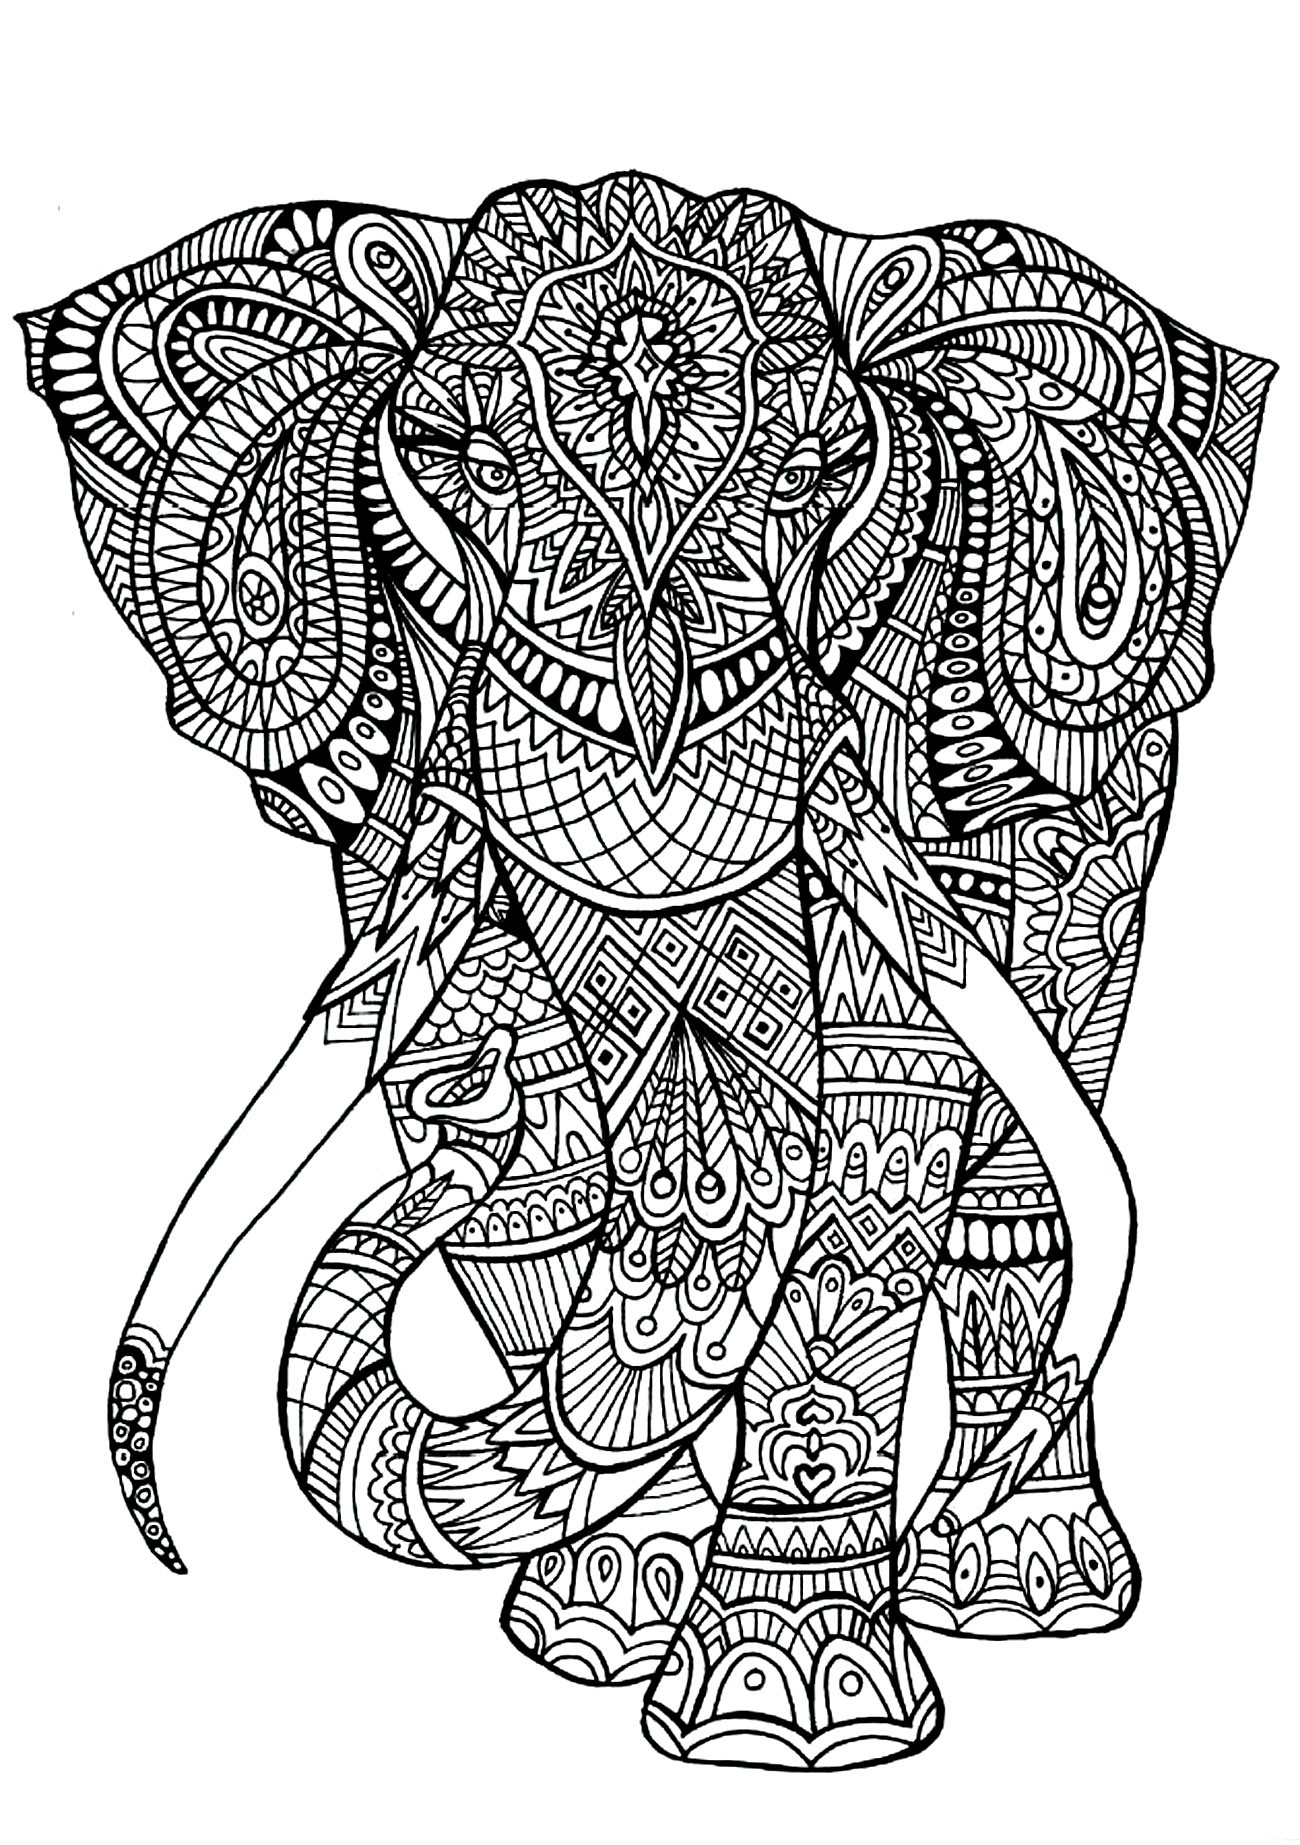 Adult Coloring Pages Animal Patterns
 Elephant patterns Animals Coloring pages for adults